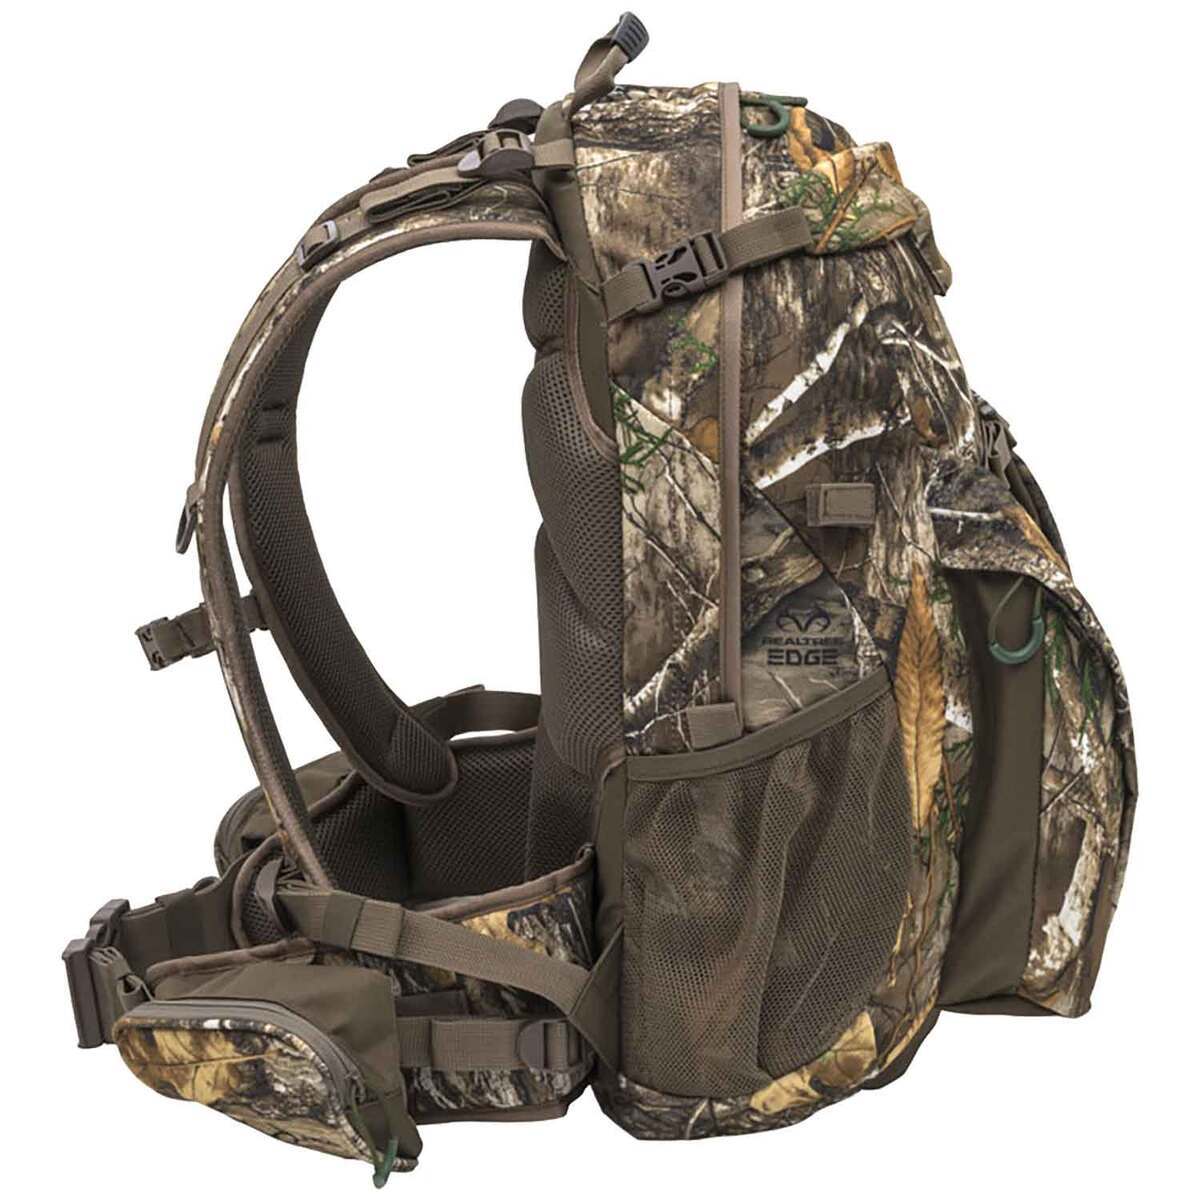 ALPS Outdoorz Matrix 44 Liter Hunting Day Pack - Realtree Edge Camo ...